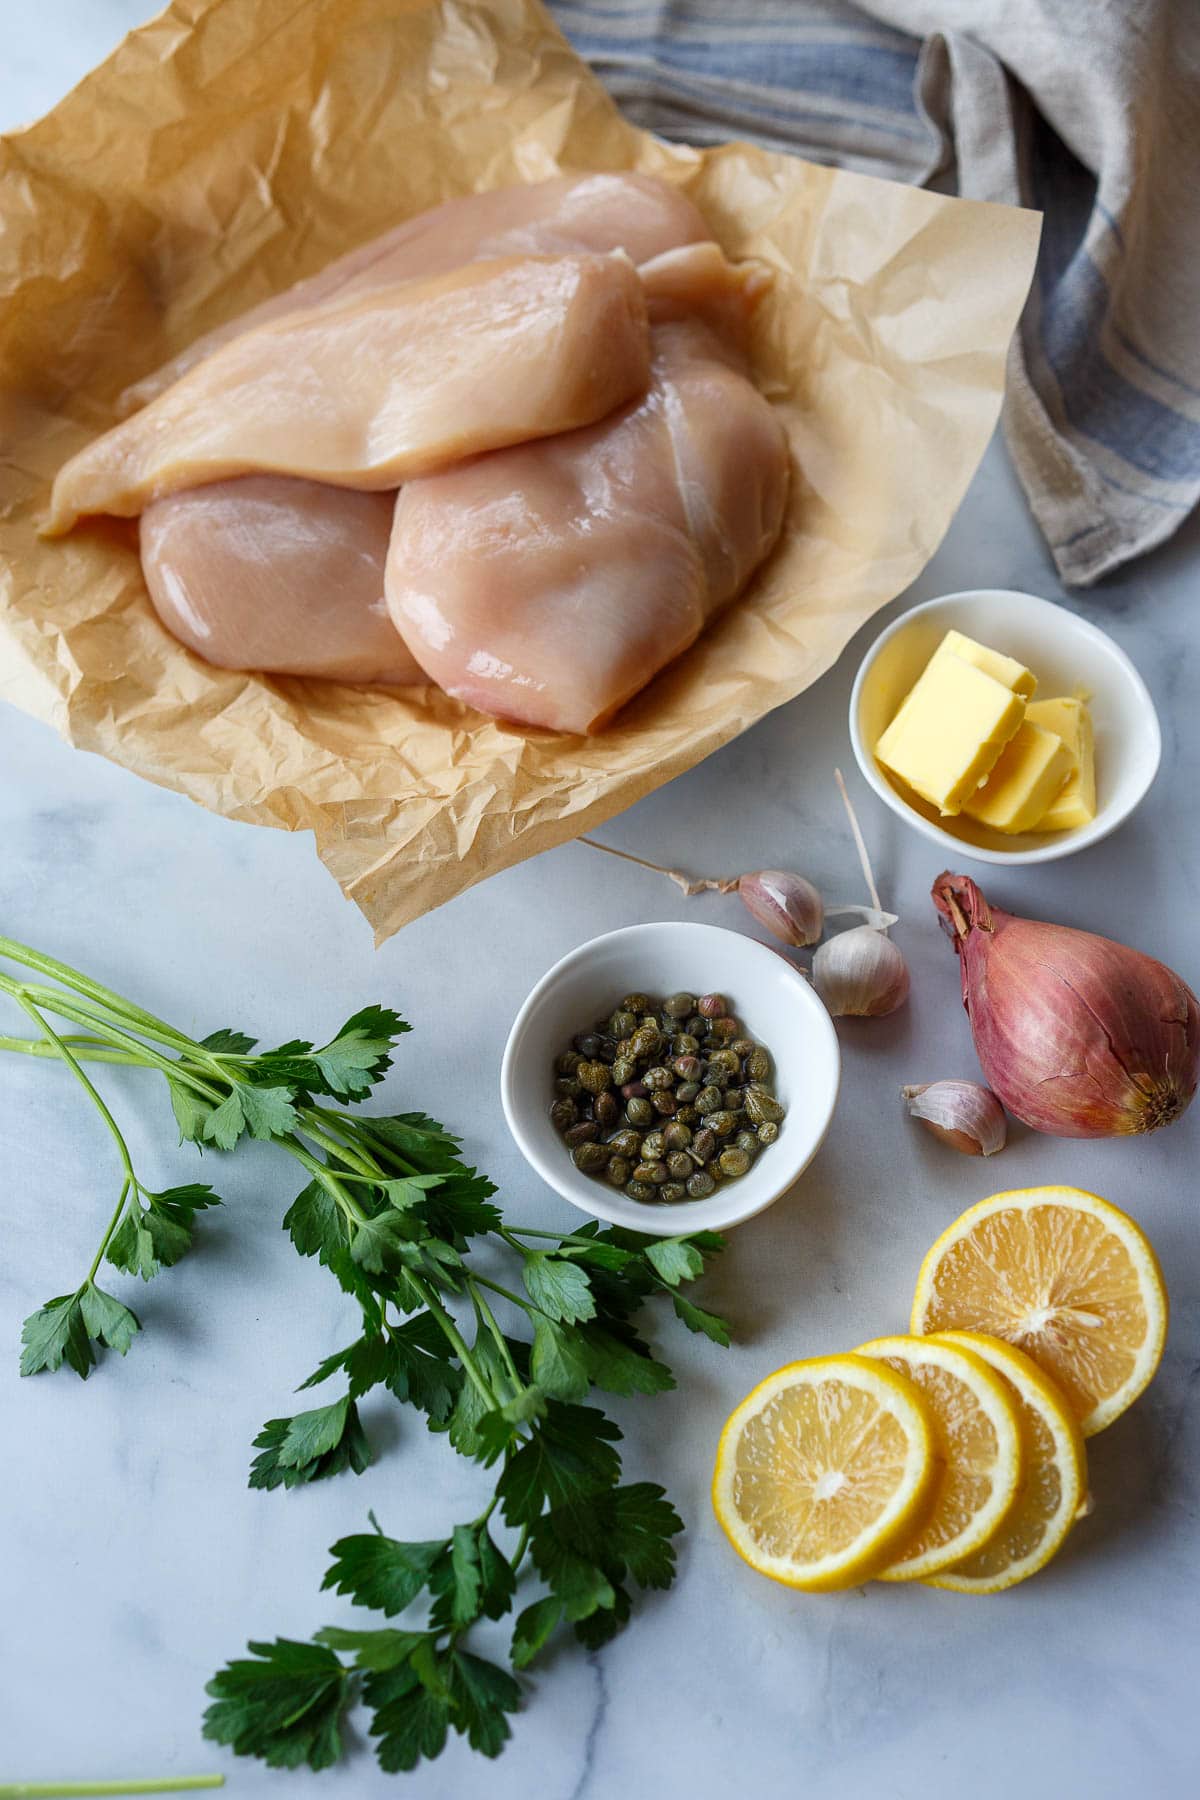 All ingredients for making chicken piccata.  Chicken, butter, capers, garlic, shallot, lemon, parsley.